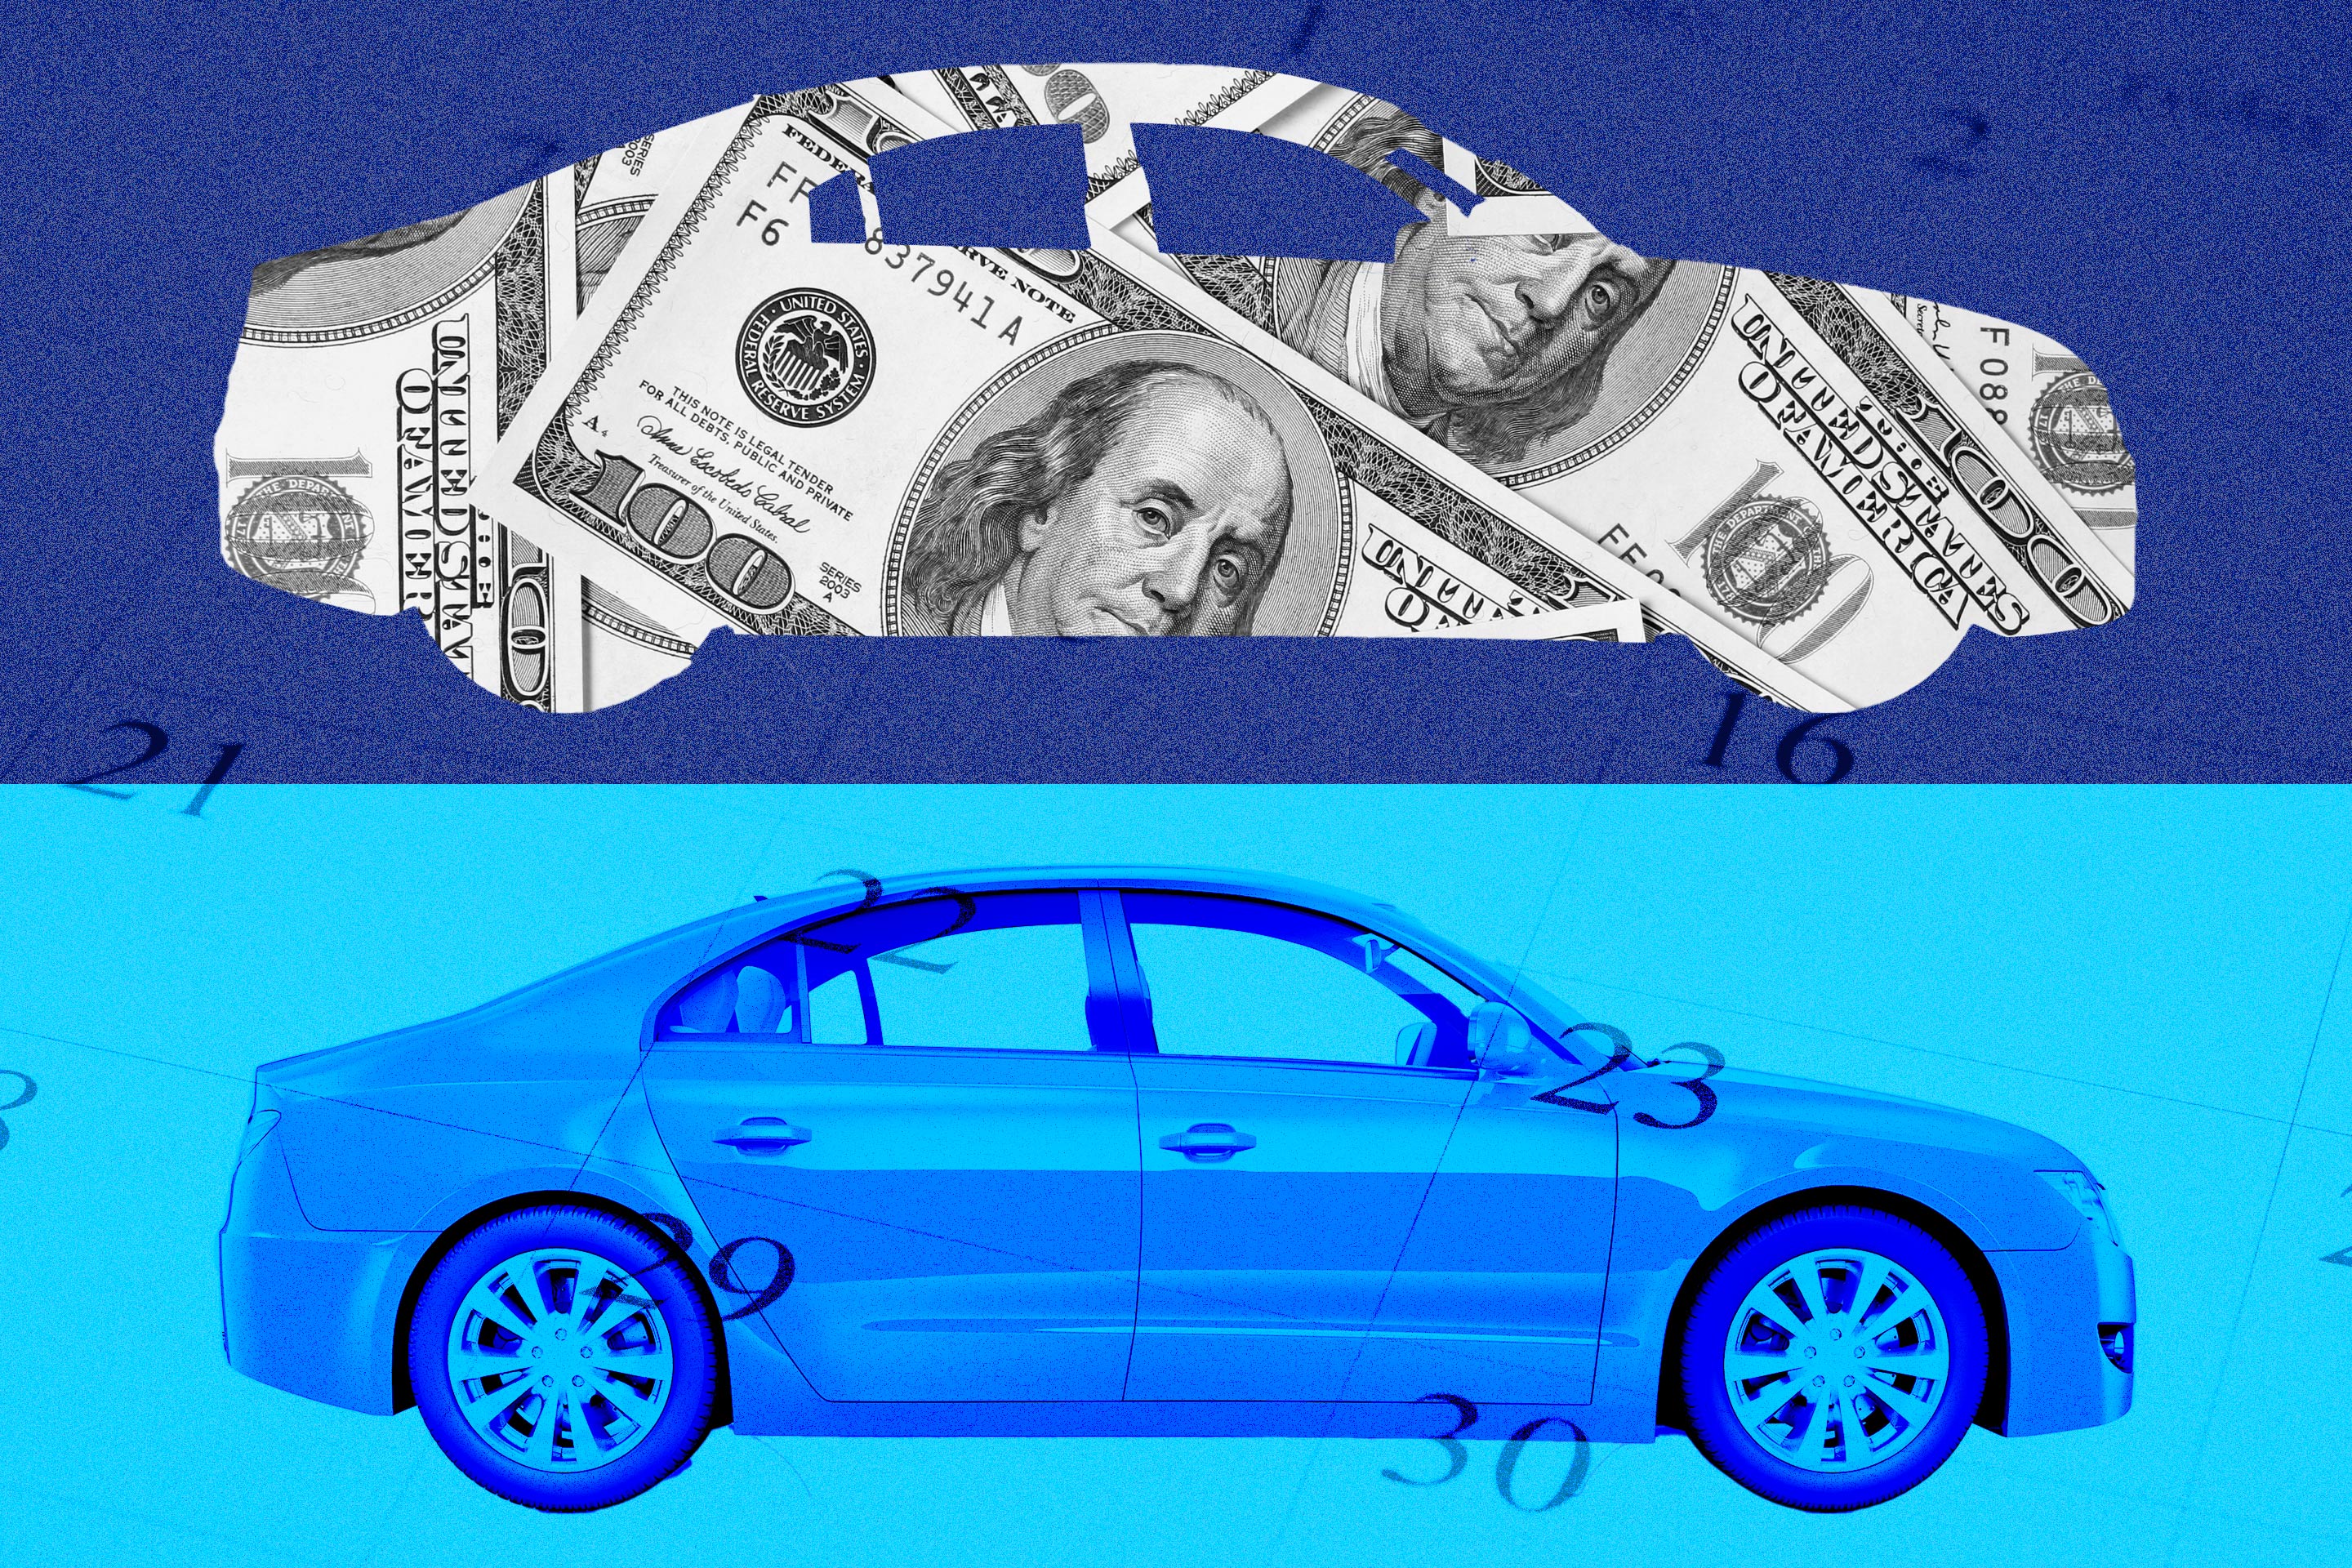 Car Insurance Rates Have The Economy's Highest Inflation Money